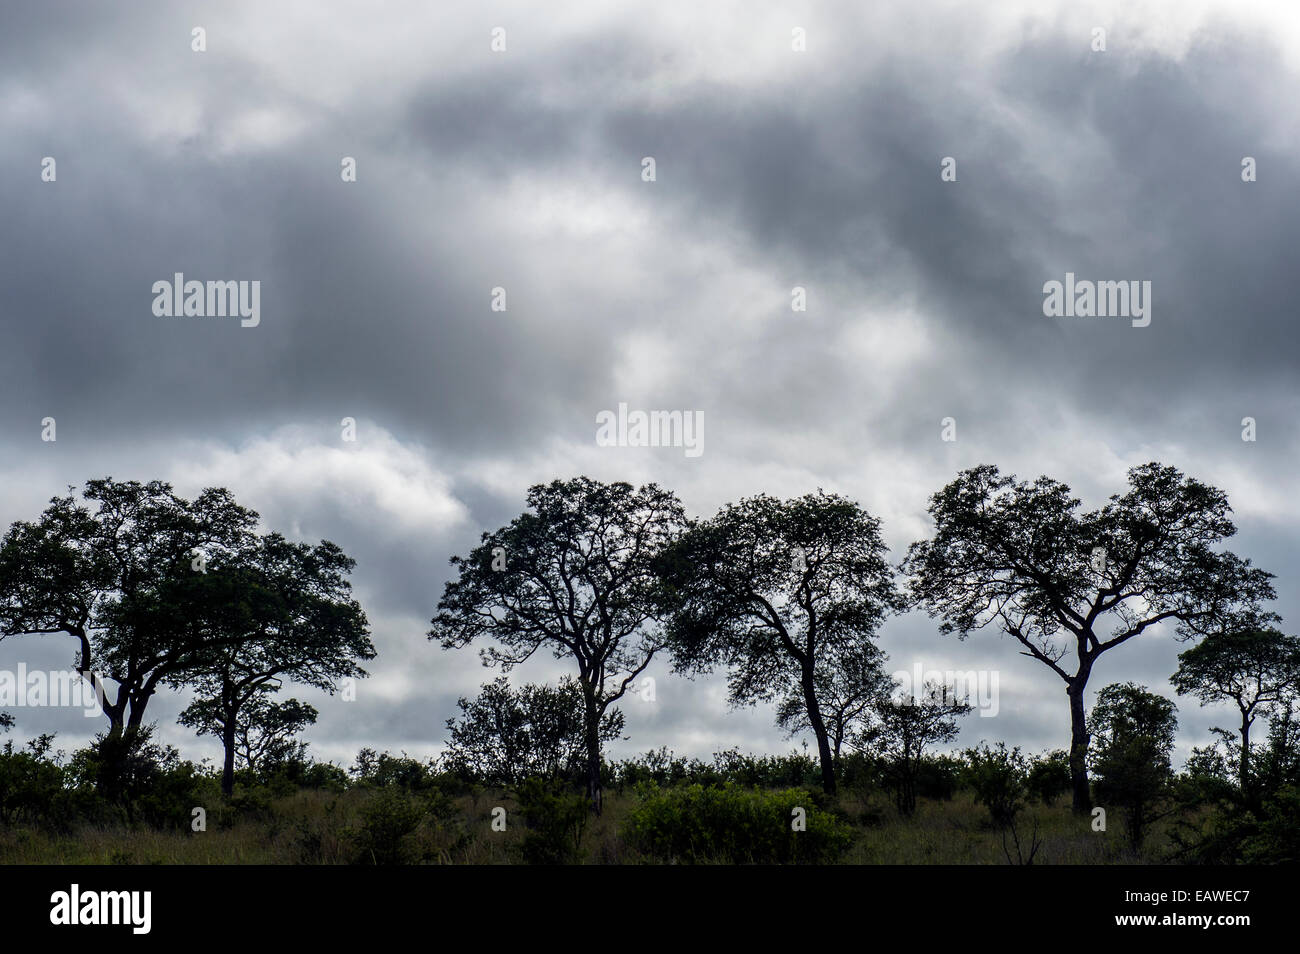 A stand of protected Leadwood trees silhouette beneath a stormy sky. Stock Photo